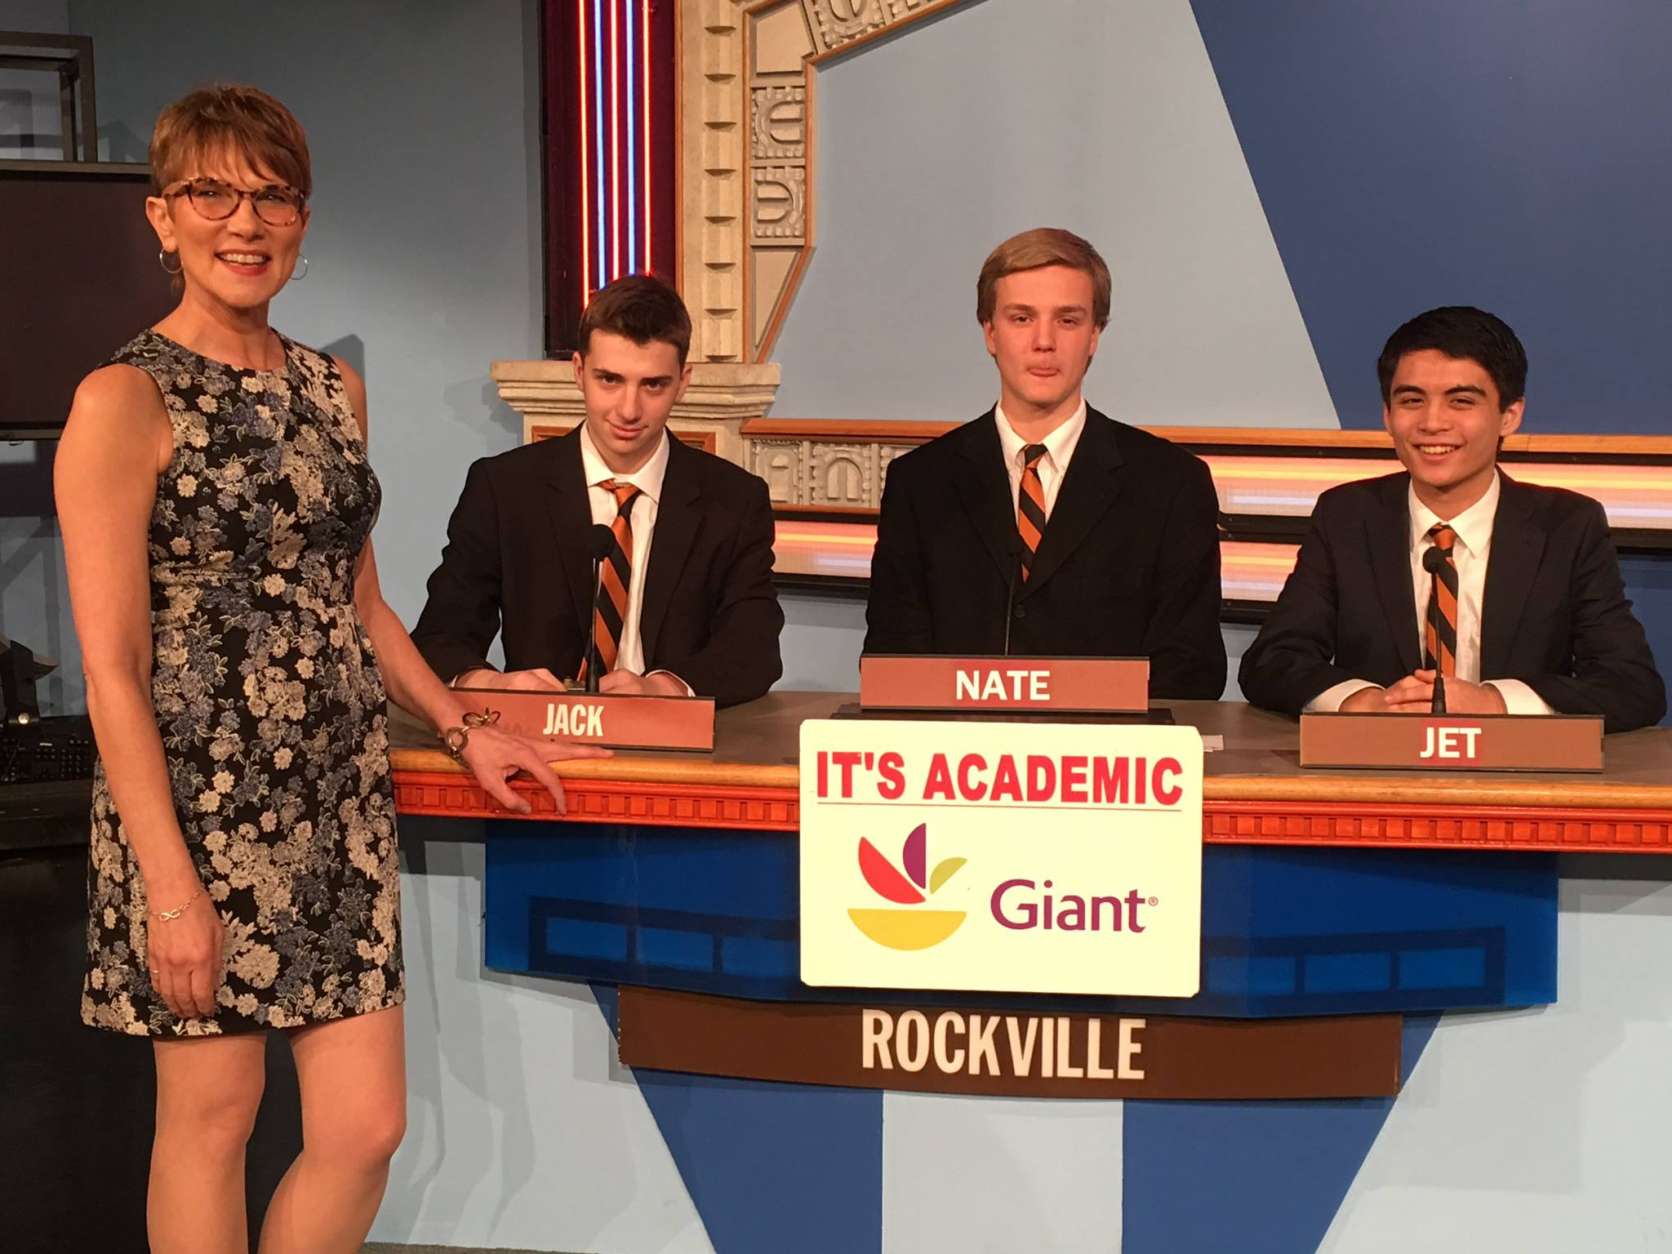 On "It's Academic," Rockville High School competes against Park view and South County high schools. The show airs March 25, 2017. (Courtesy Facebook/It's Academic)